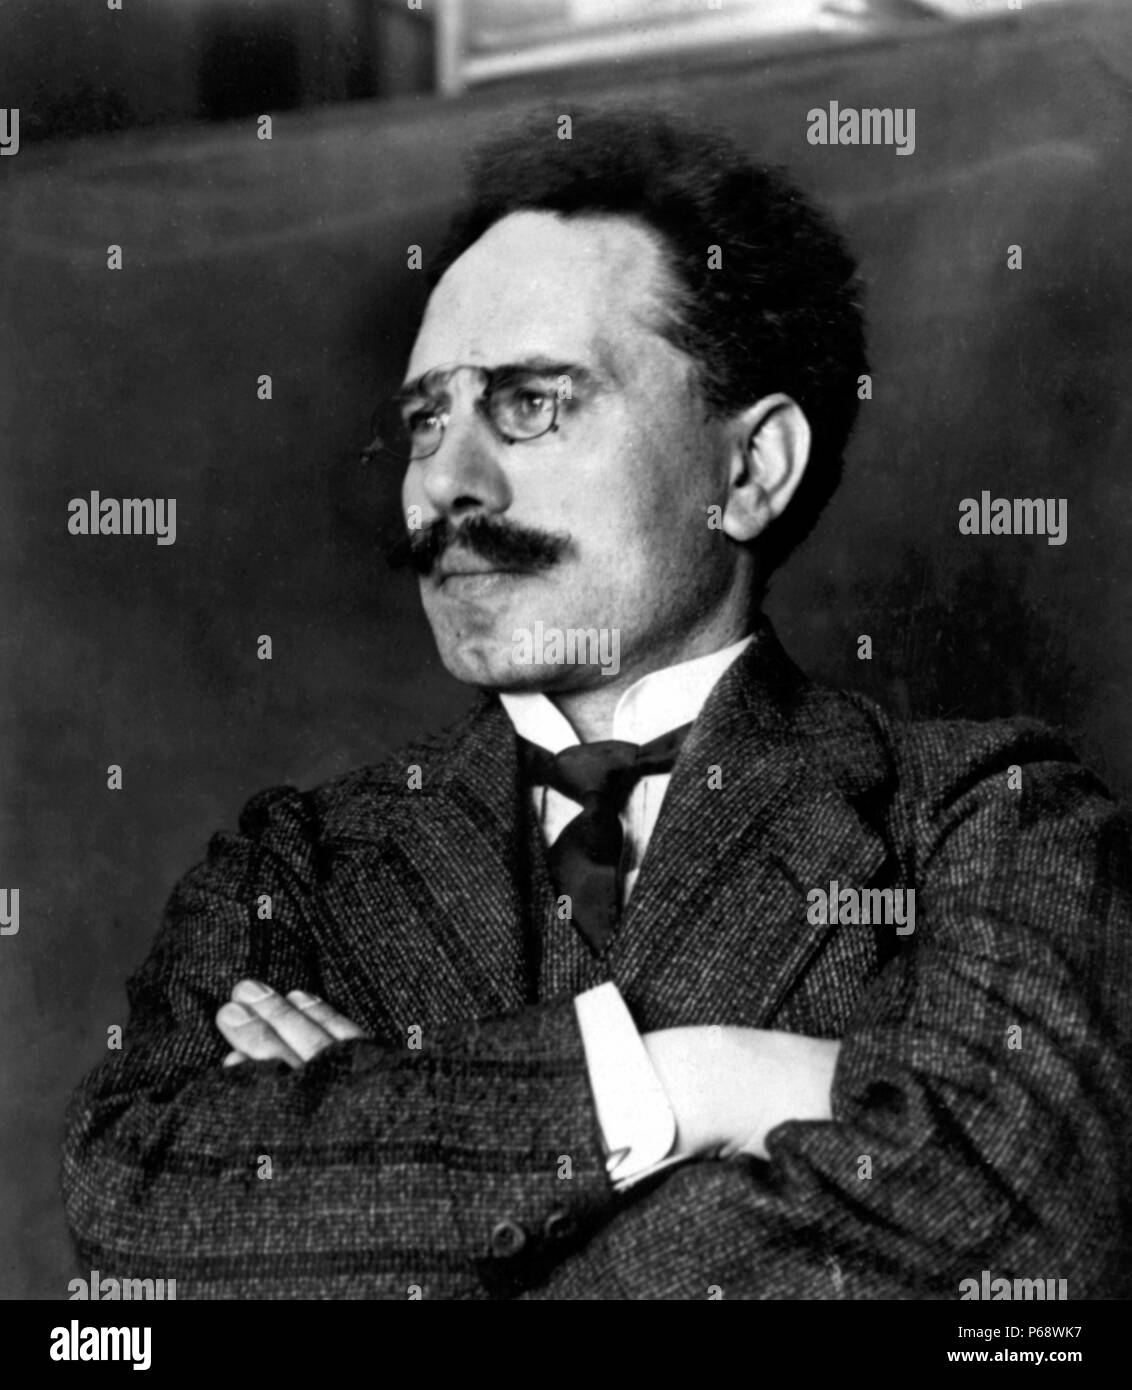 Karl Liebknecht (1871 – 15 January 1919) German socialist and a co-founder with Rosa Luxemburg of the Spartacist League and the Communist Party of Germany. Stock Photo